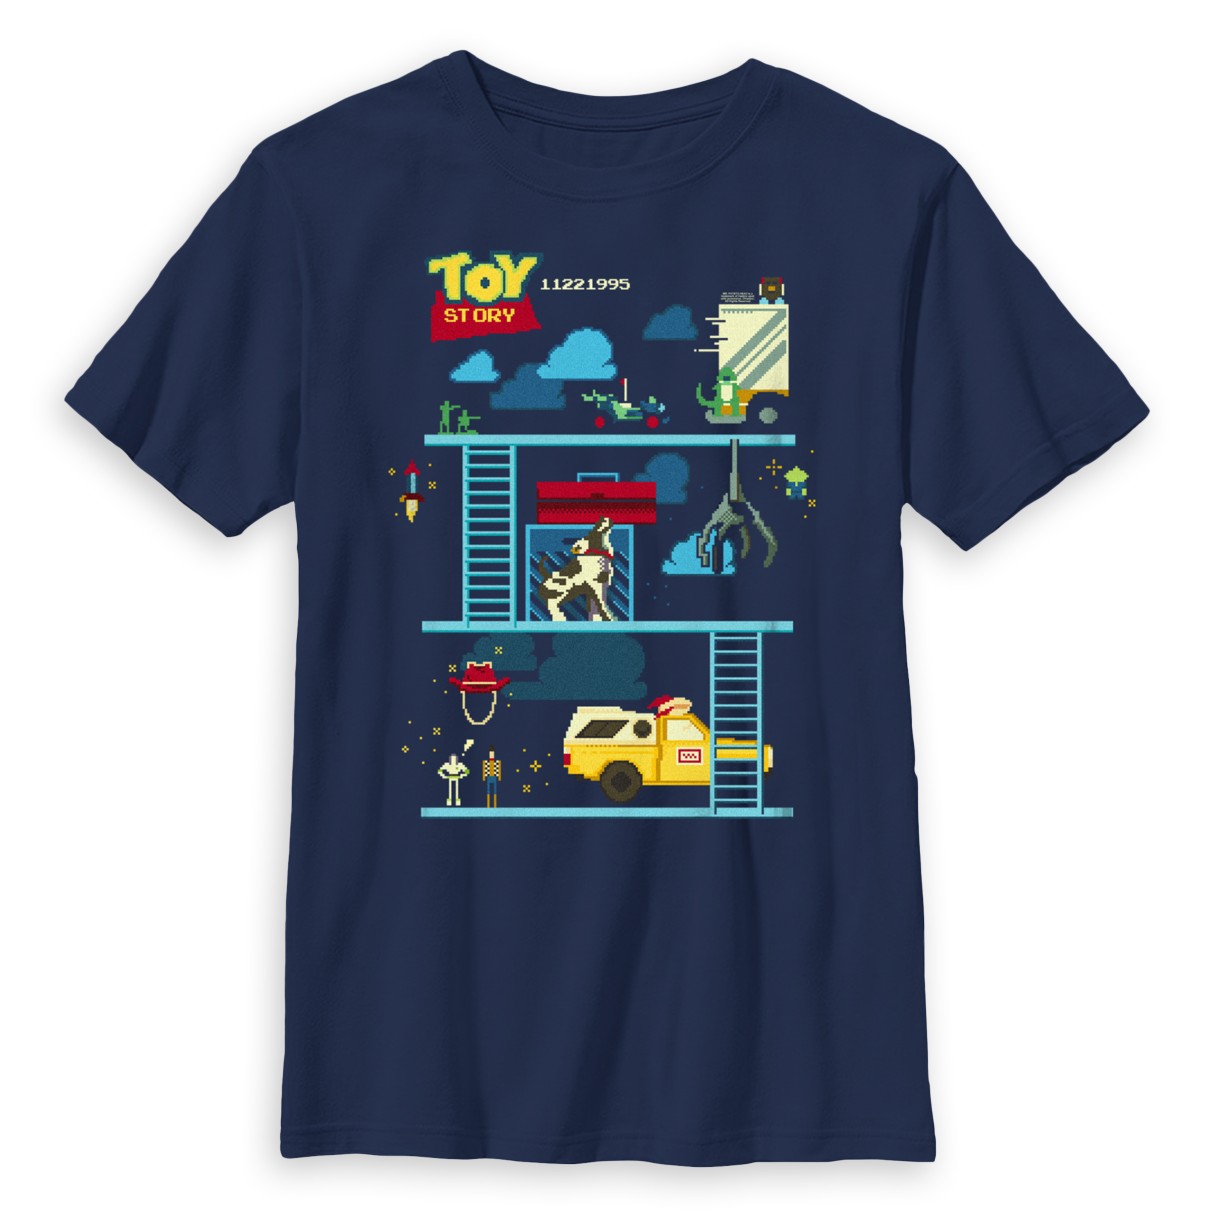 Toy Story Video Game T-Shirt for Kids